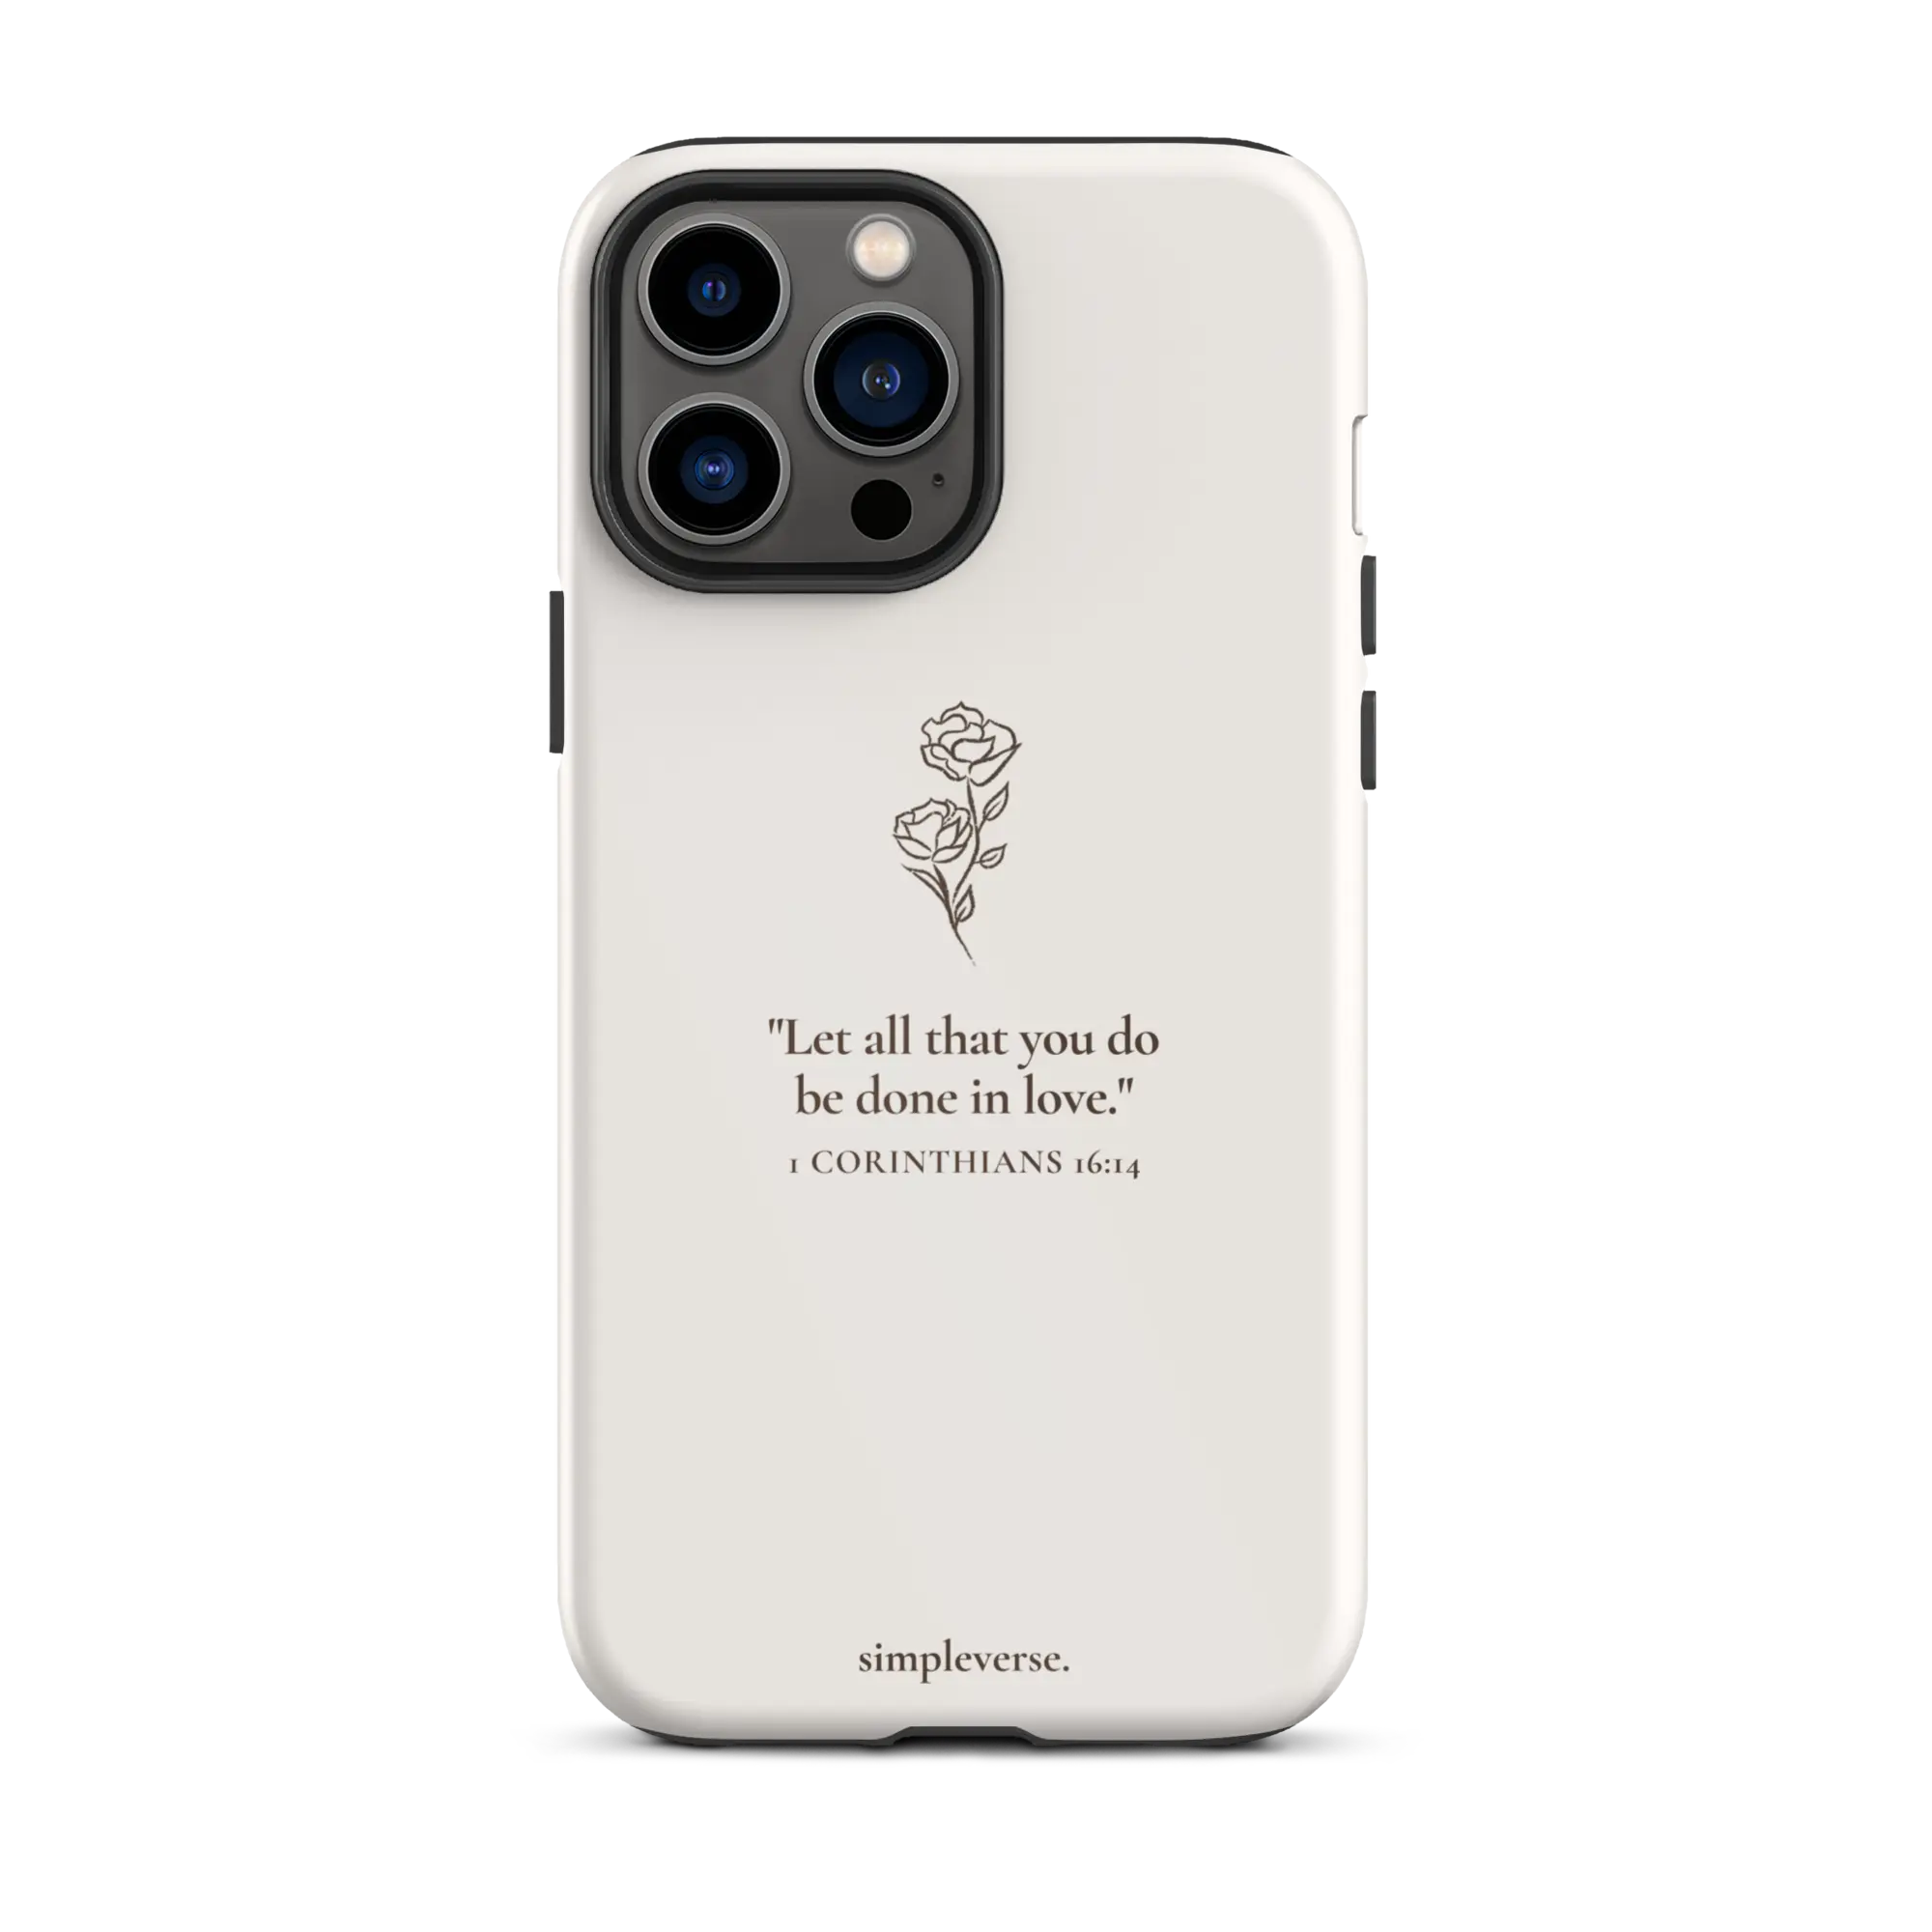 Christian iPhone cover featuring the Corinthians love verse in subtle script with a delicate rose, symbolizing love and faith.